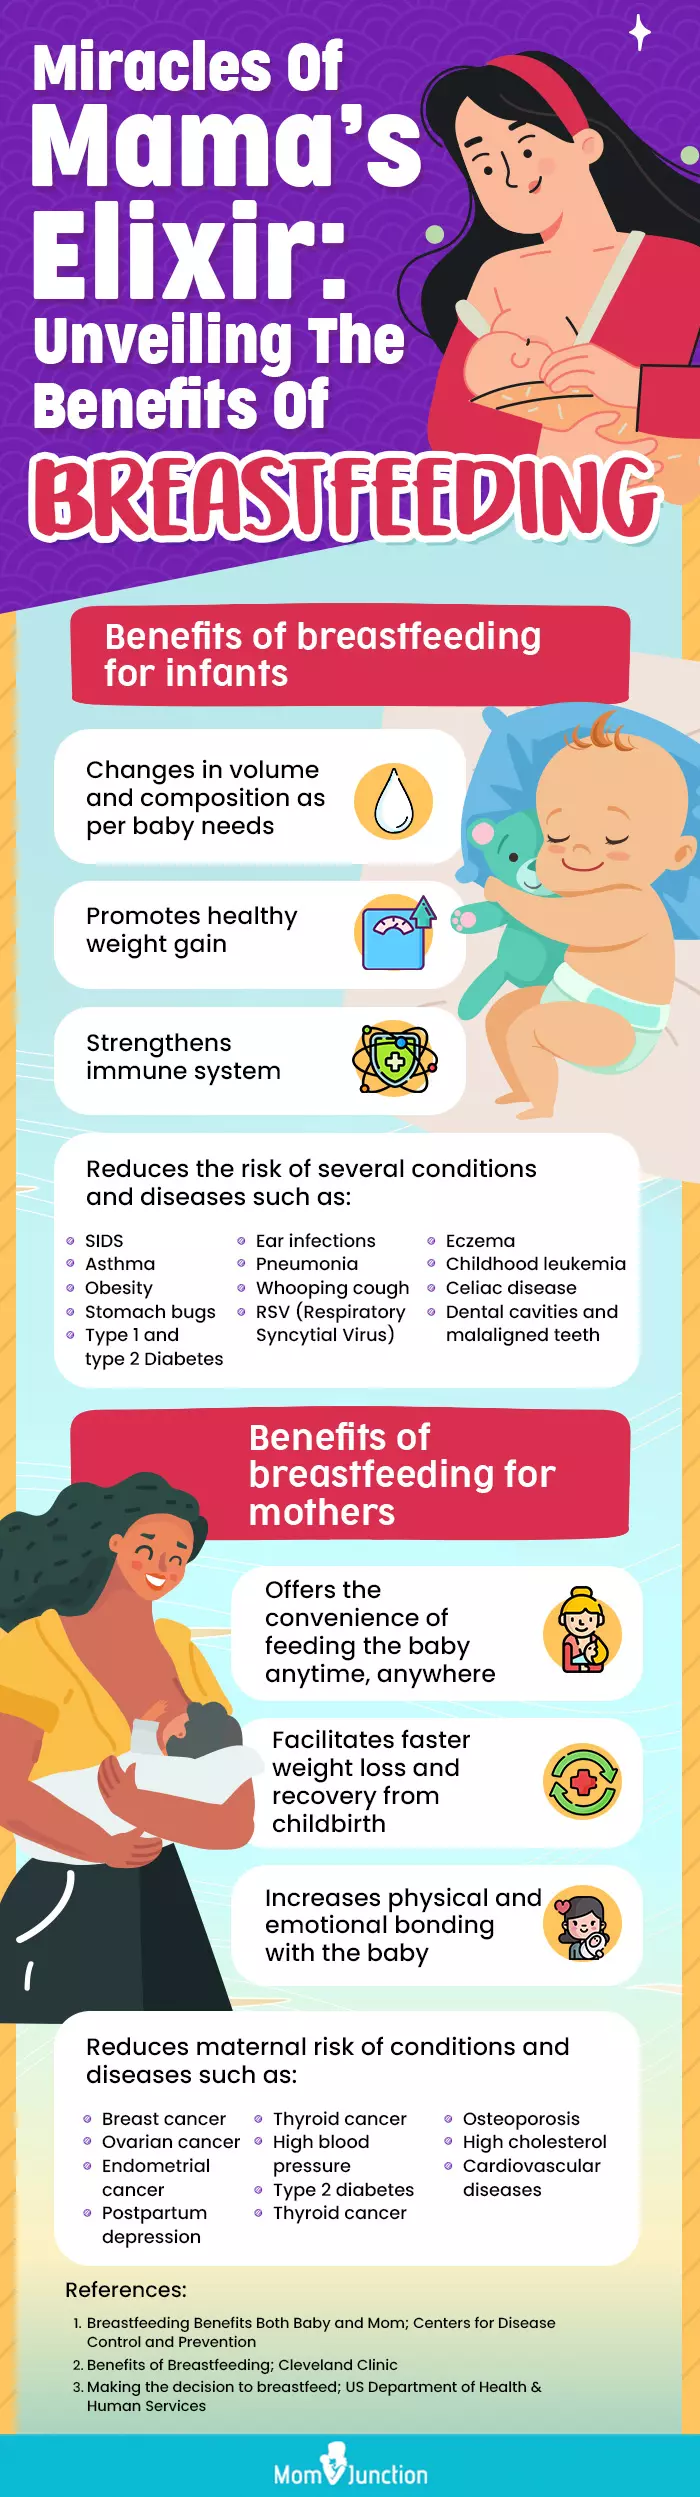 Miracles Of Mamas Elixir Unveiling The Benefits Of Breastfeeding(infographic)